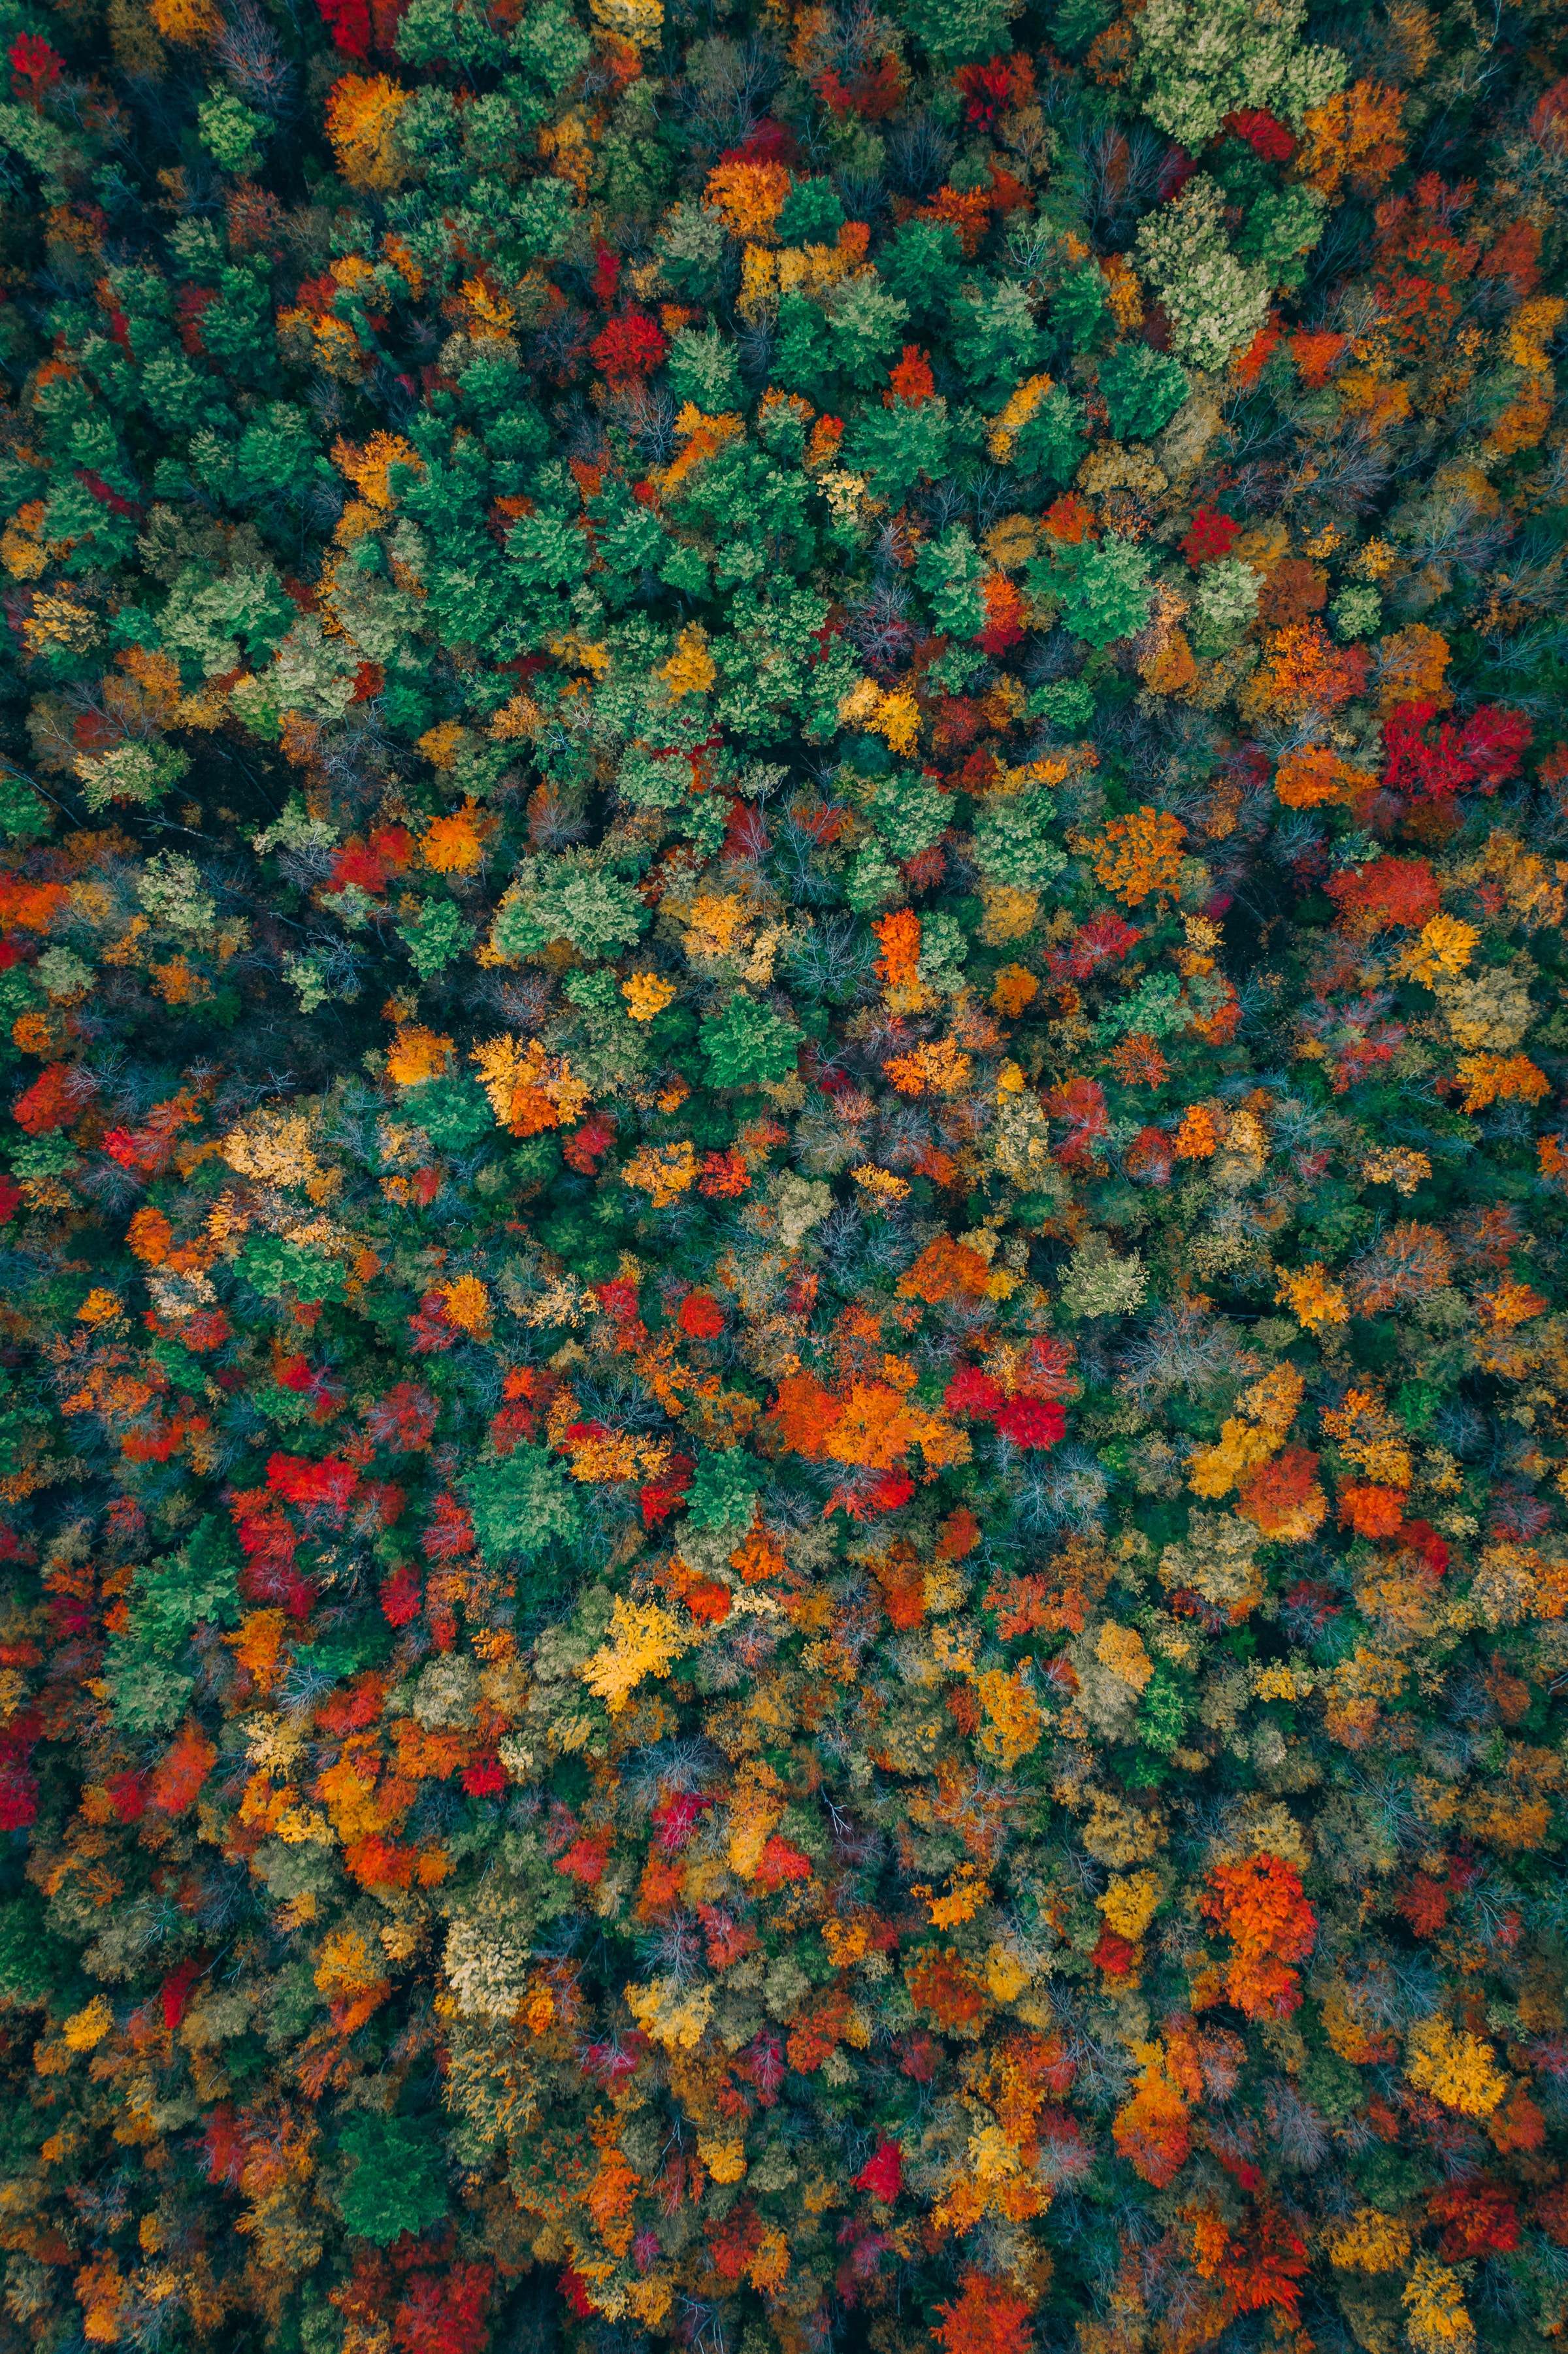 android view from above, multicolored, motley, autumn, nature, trees, forest